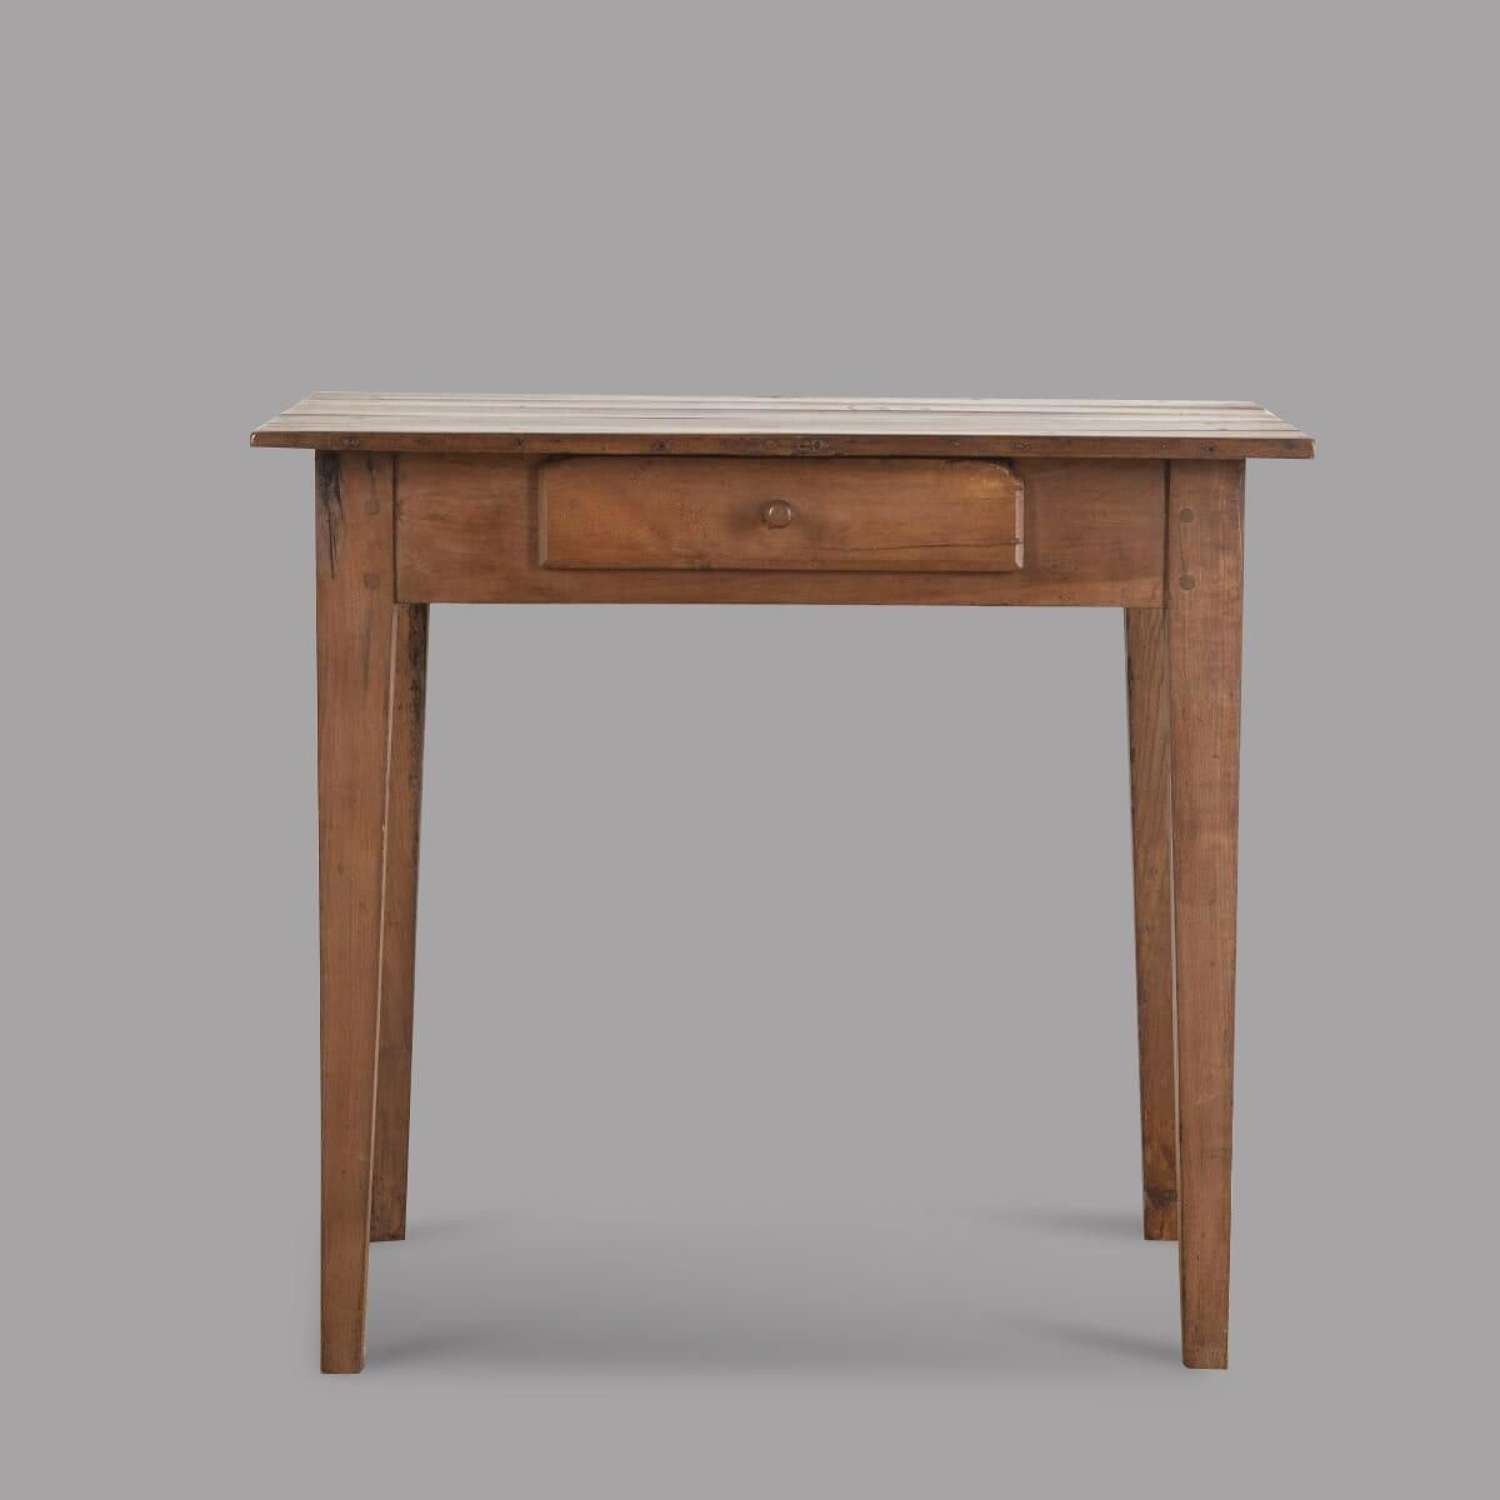 19th Century Walnut Occasional Table with Drawer